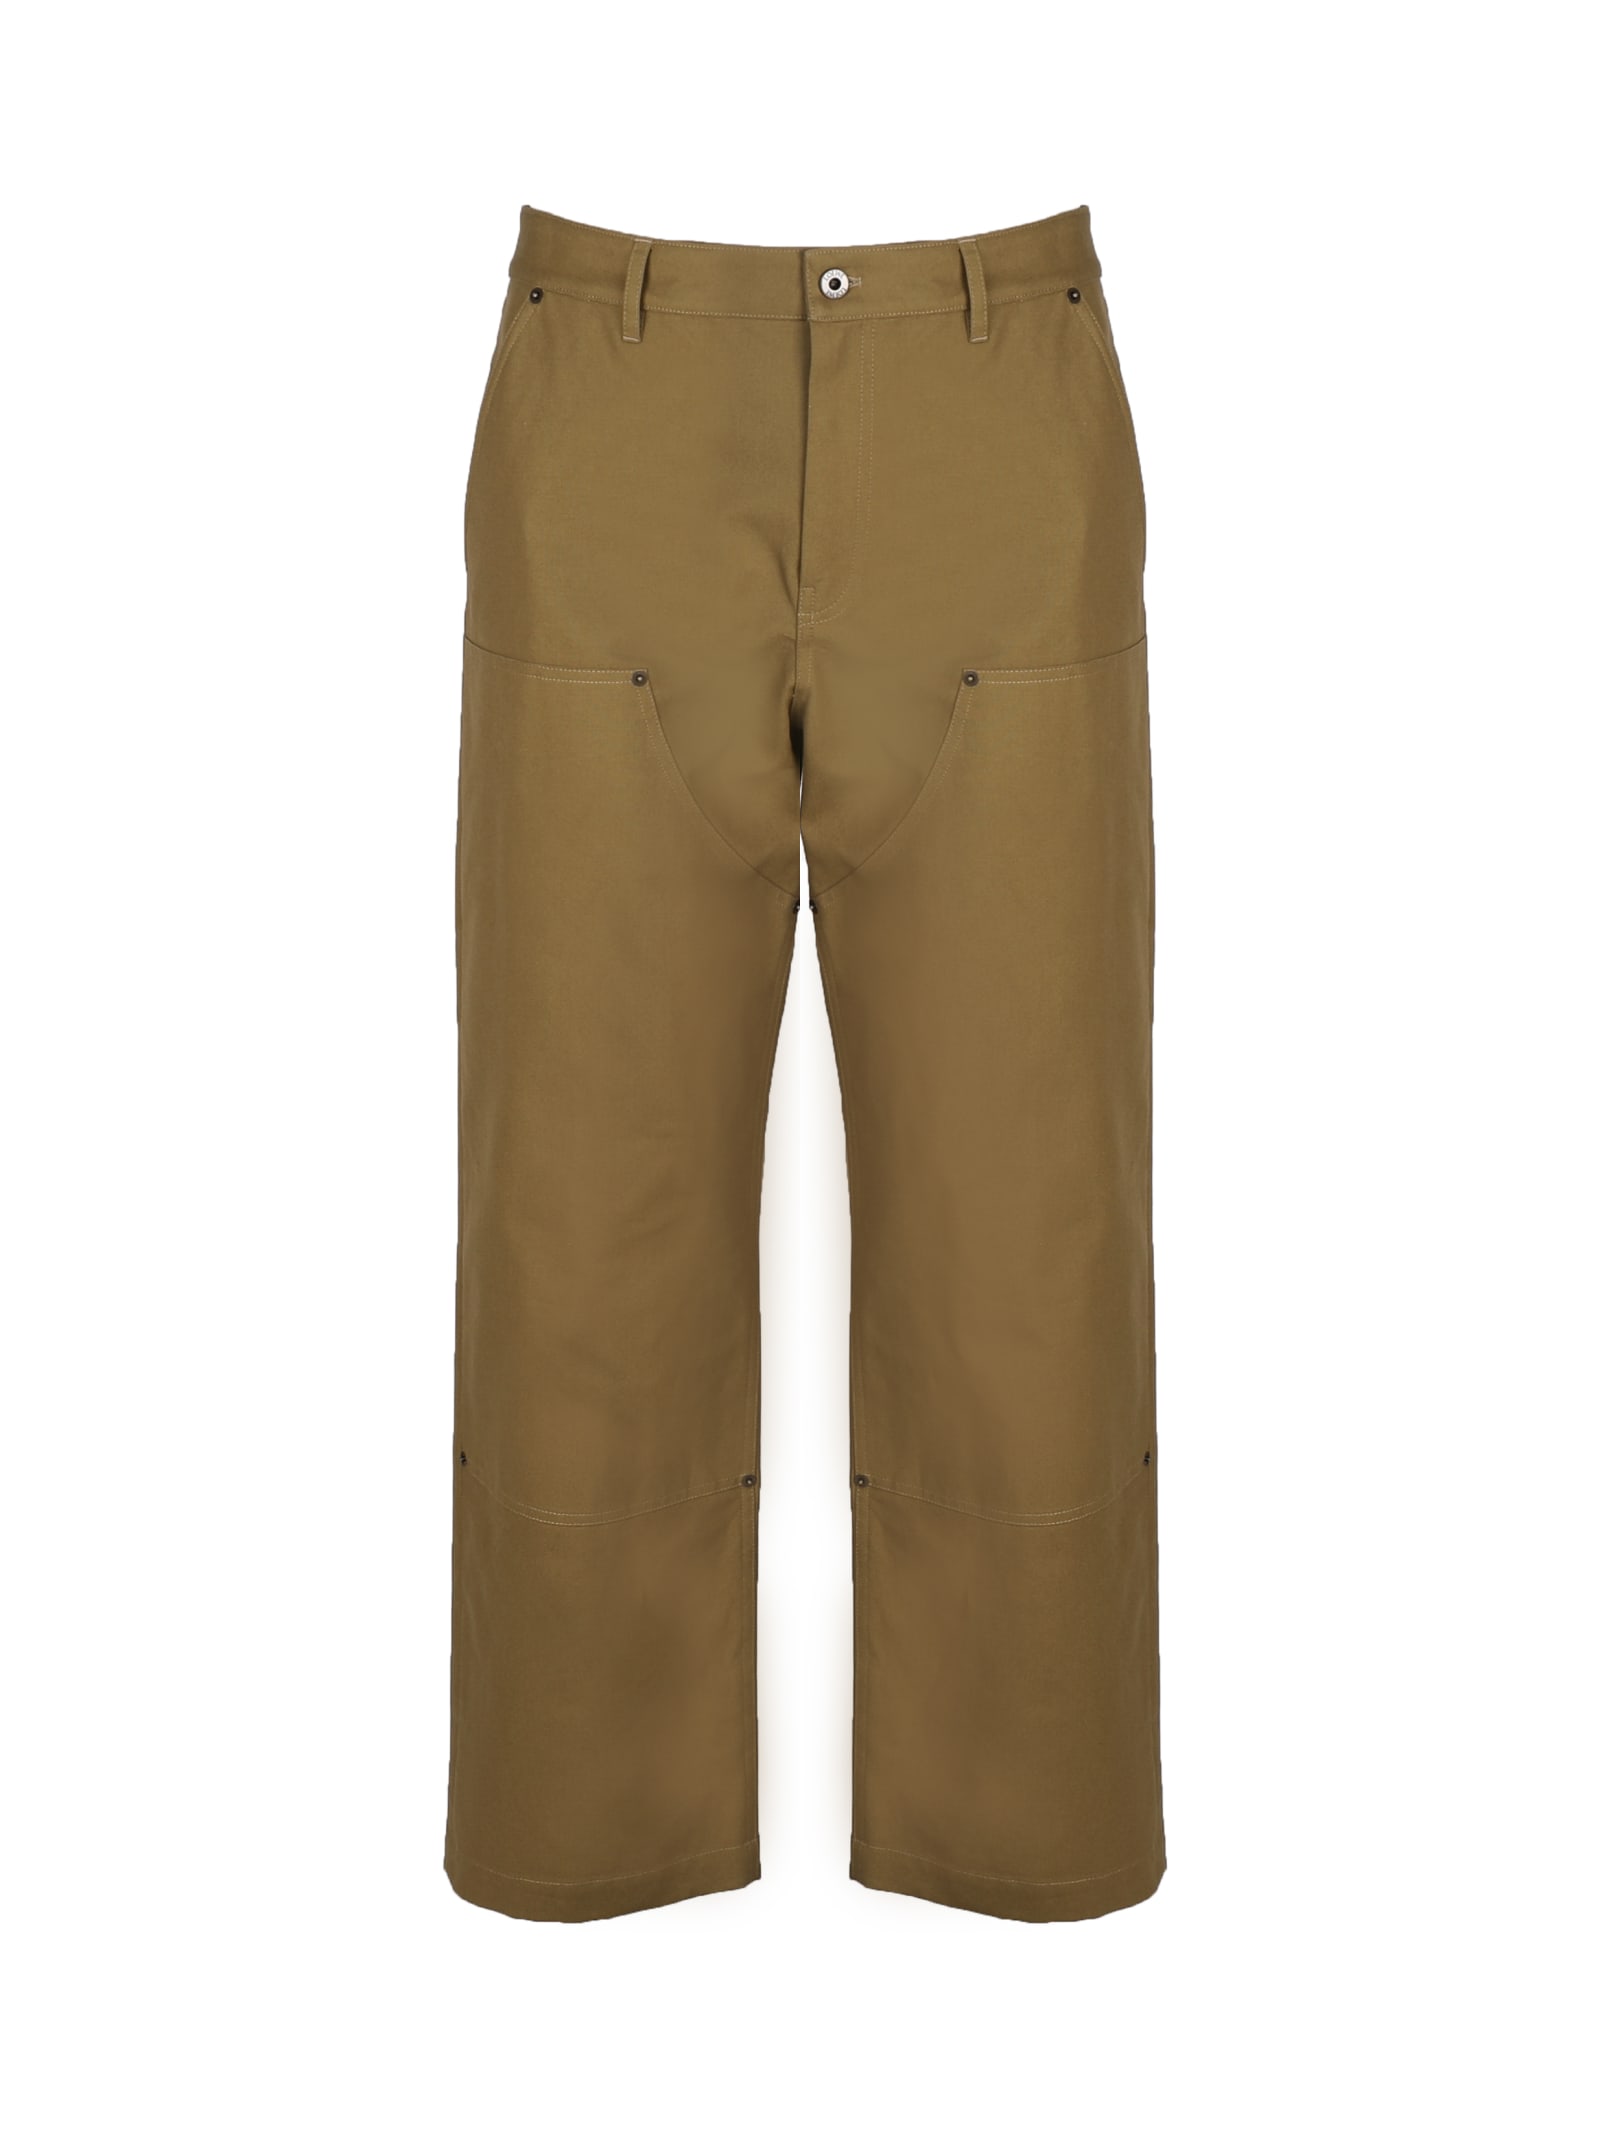 LOEWE WORKWEAR TROUSERS IN COTTON CANVAS